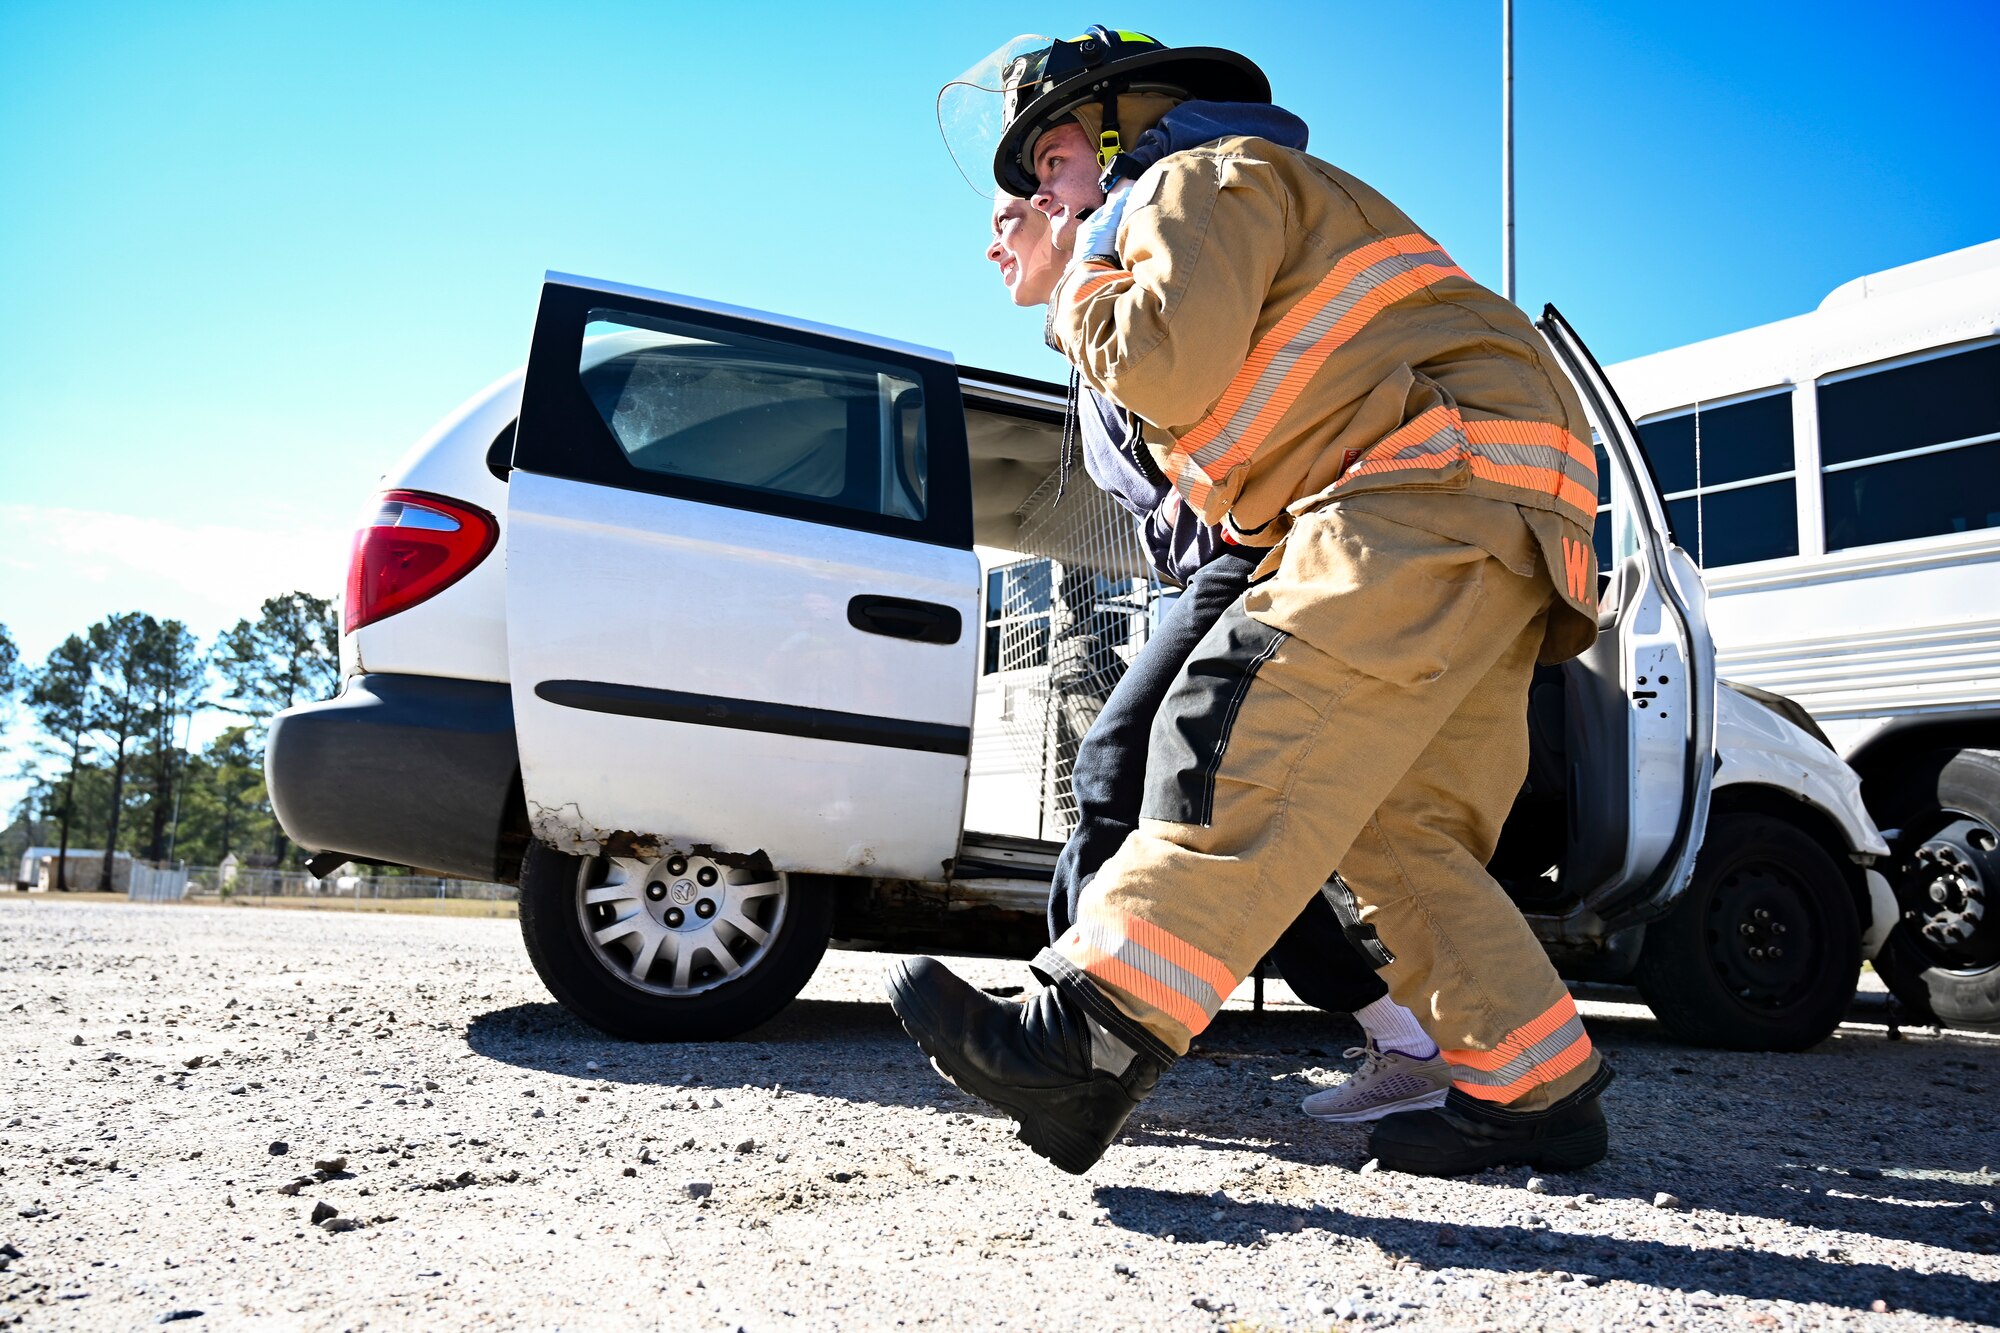 An Airman assigned to the 20th Civil Engineer Squadron fire department carries an injured volunteer out of a car crash during a mass casualty training exercise at Shaw Air Force Base, South Carolina, Jan. 19, 2022. The purpose of the mass casualty exercise was to enhance and build on each agency's readiness and posture for quick response emergencies. (U.S. Air Force photo by Senior Airman Madeline Herzog)